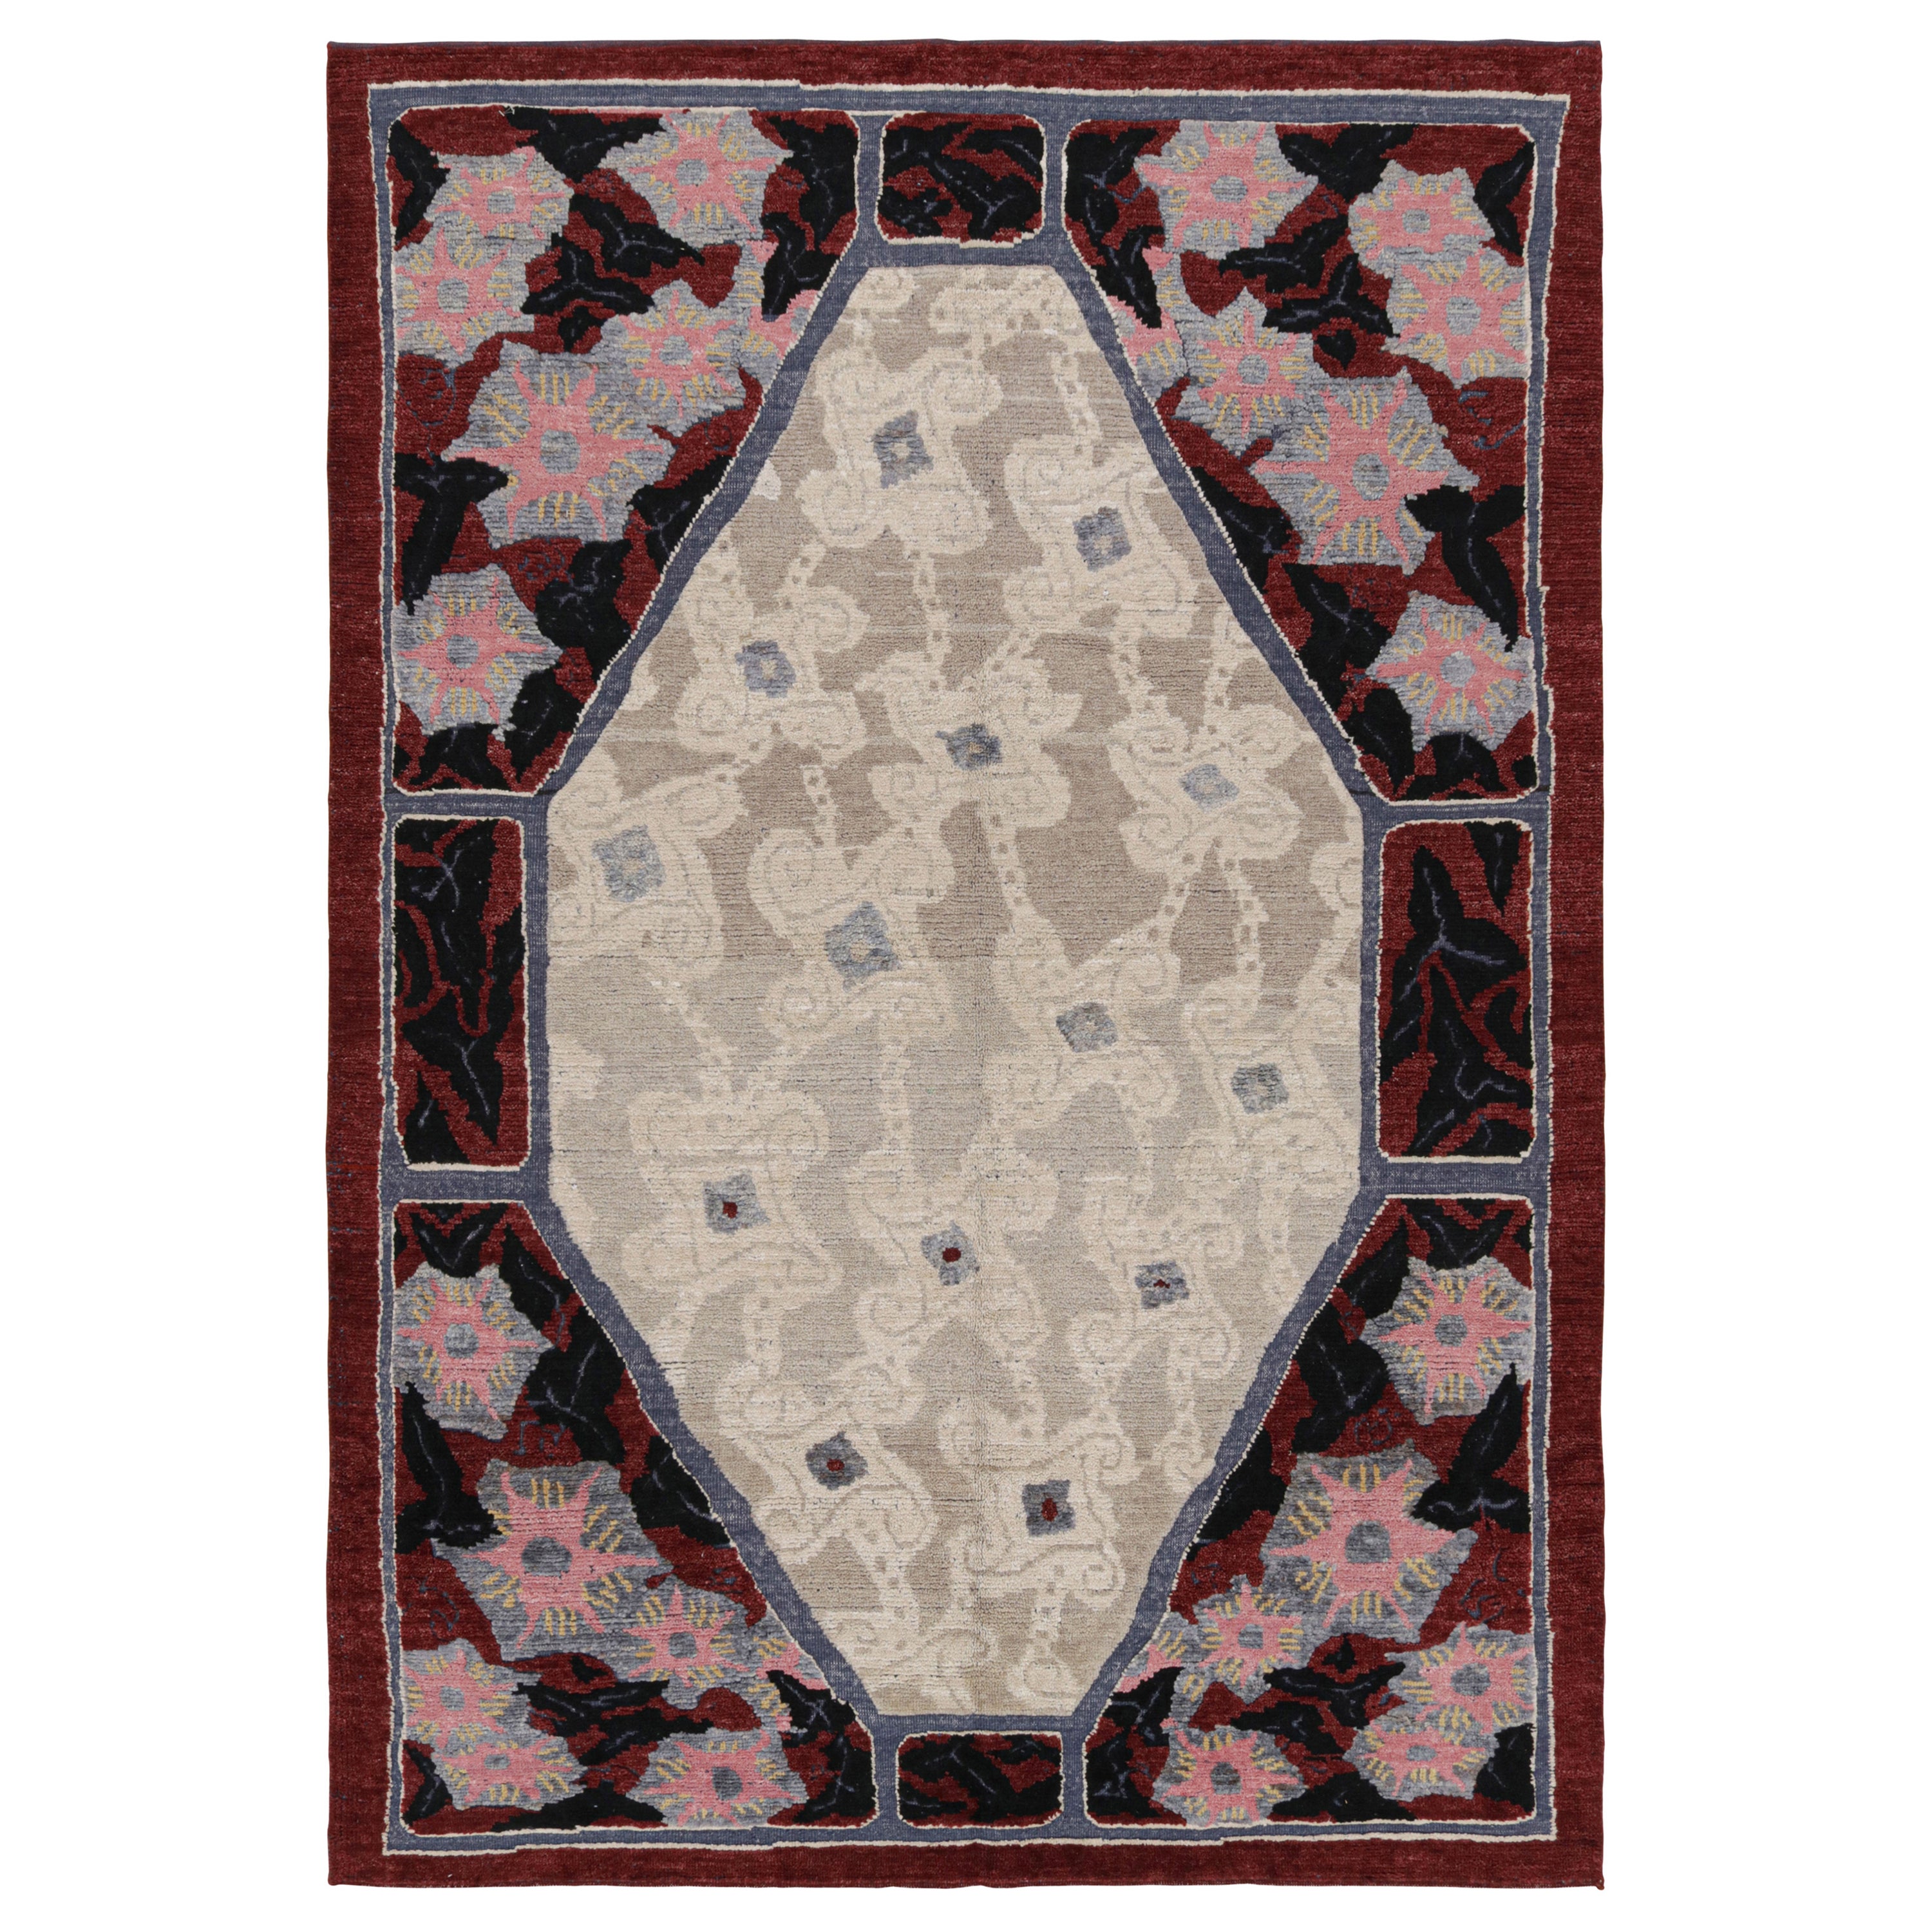 Rug & Kilim's French Art Deco Rug with with Beige and Red Geometric Patterns (Rug & Kilim's French Art Deco Rug's French Art Deco Rug's French Art Deco Rug's French Art Deco Patterns (Rug & Kilim's French Art Deco Rug's French Art Deco Patterns) 